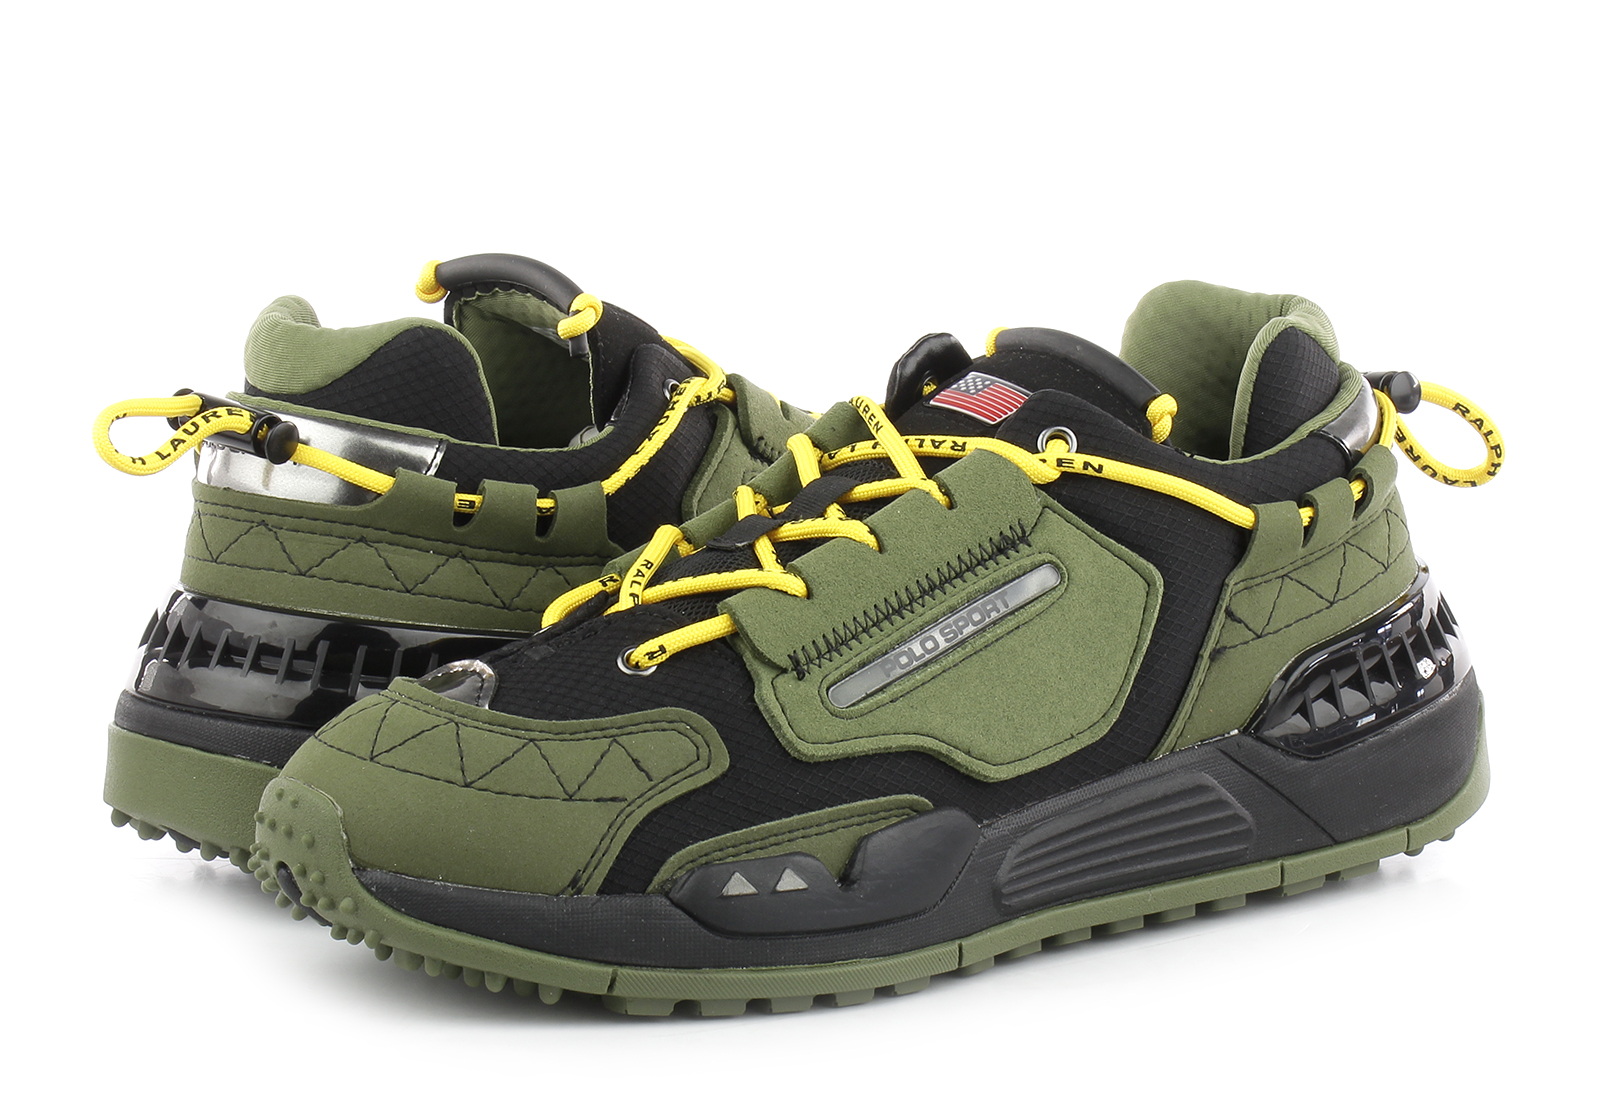 Polo Ralph Lauren Sneakers - Ps200 - P809878067001 - Online shop for  sneakers, shoes and boots